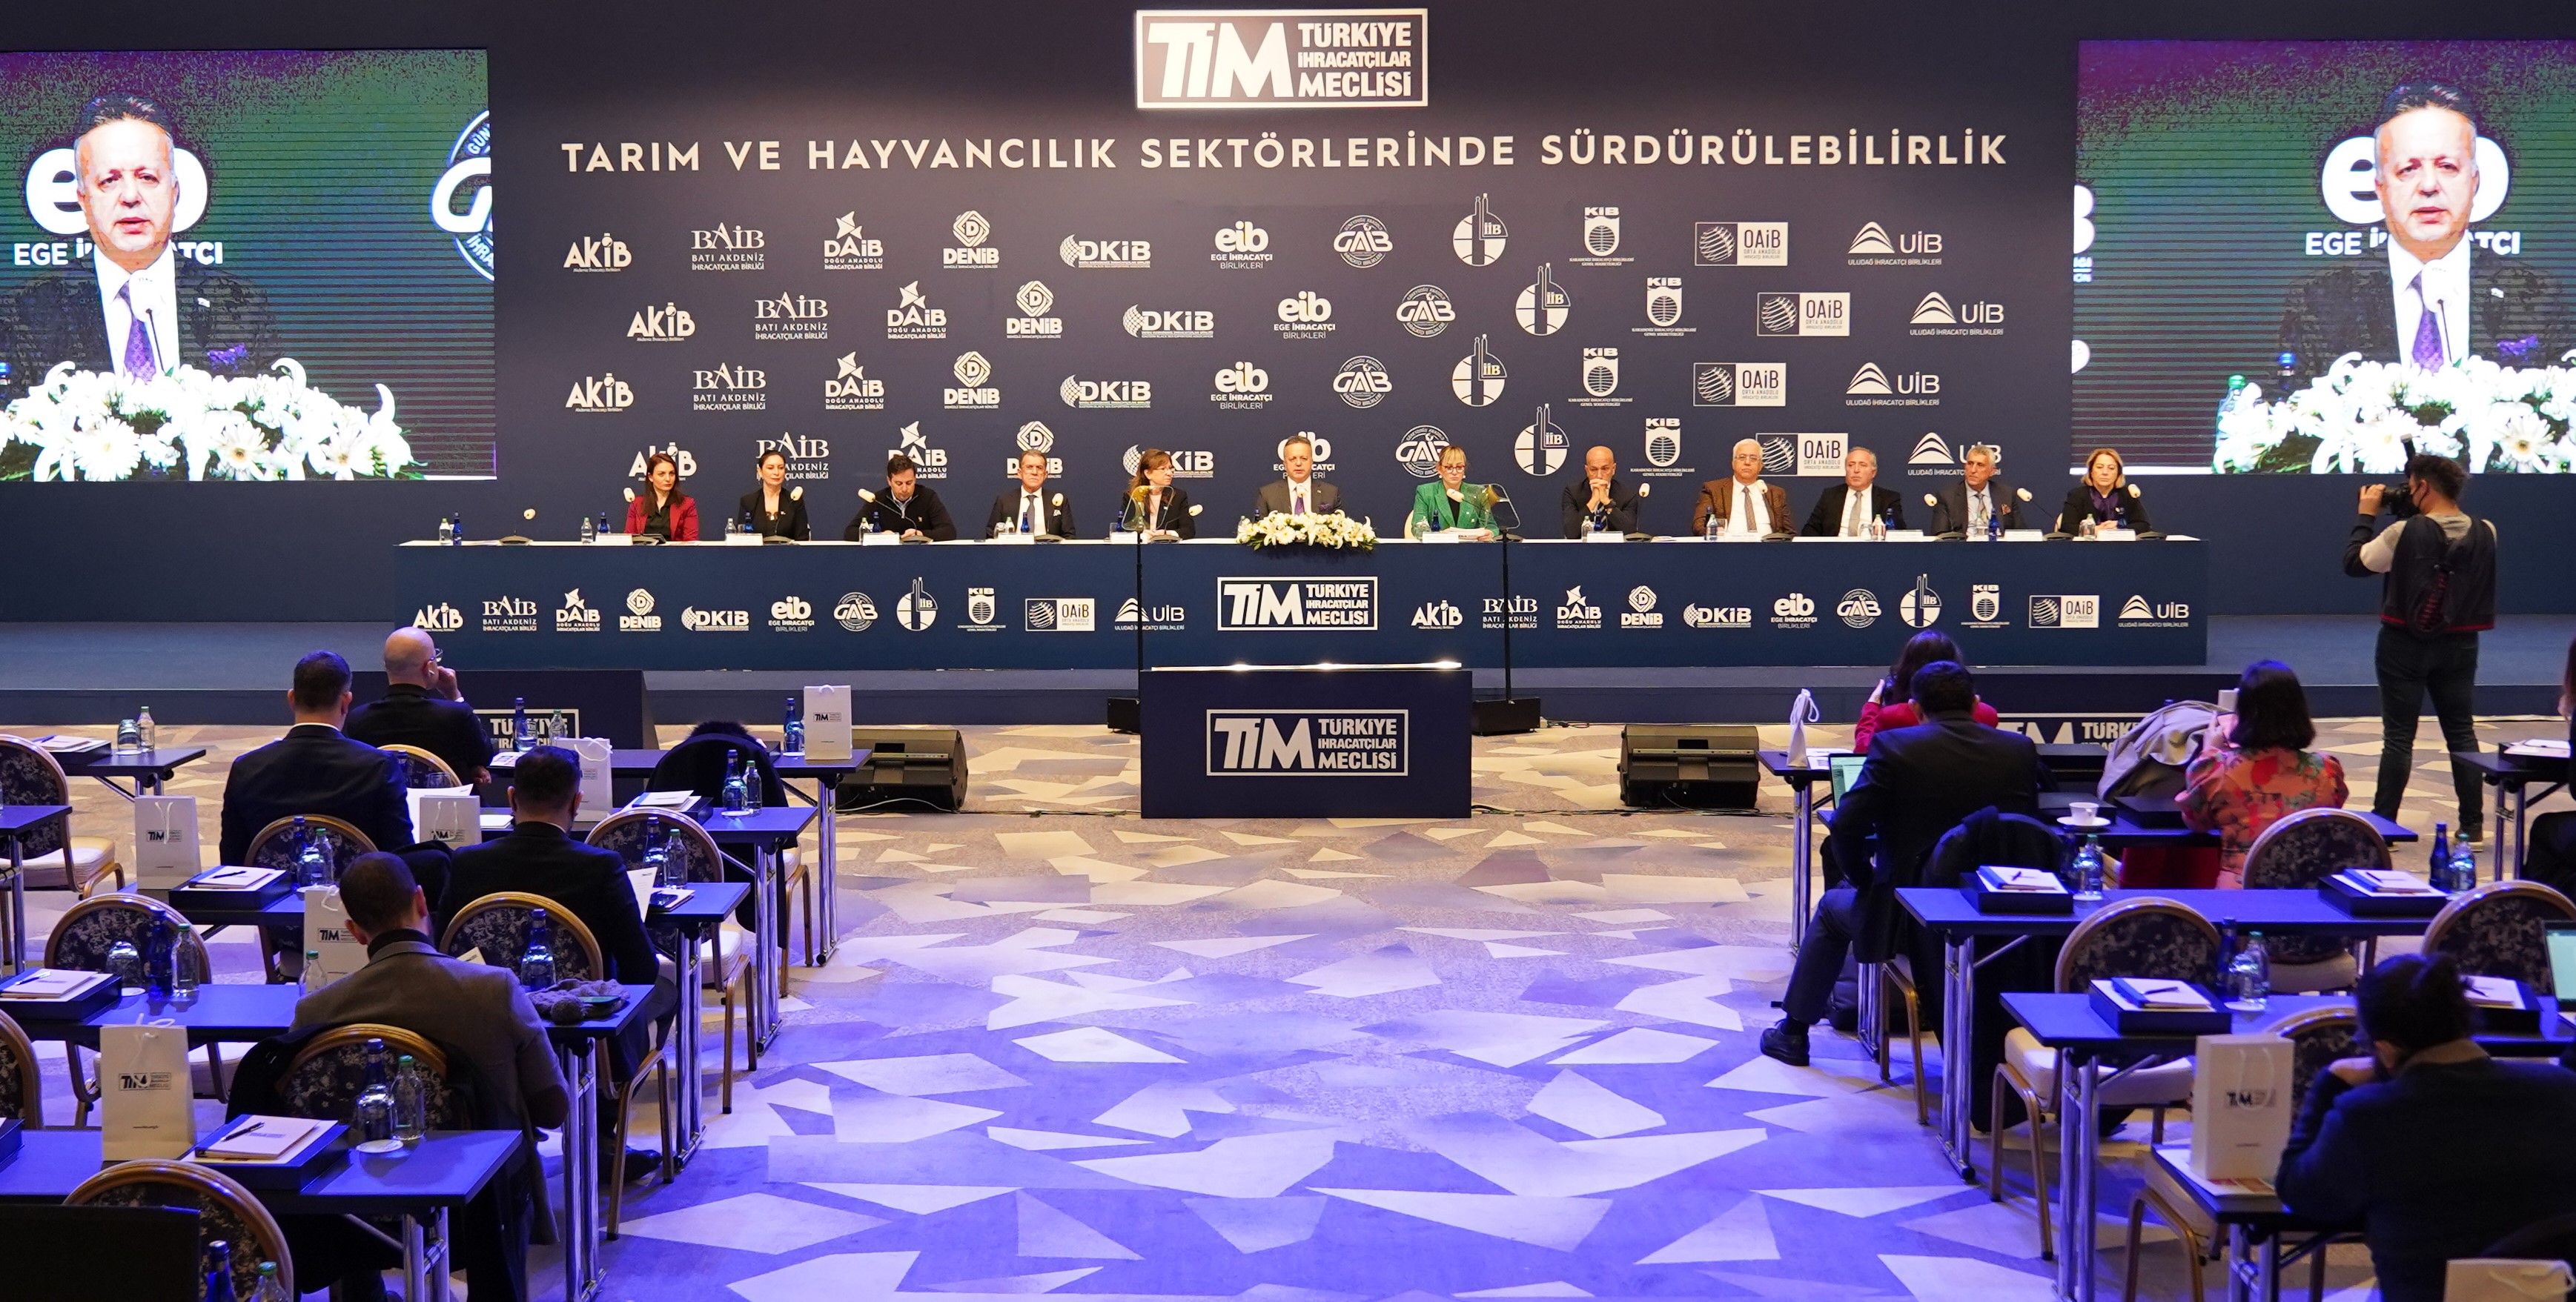 TİM Announces Sustainability Action Plan in Agriculture and Livestock